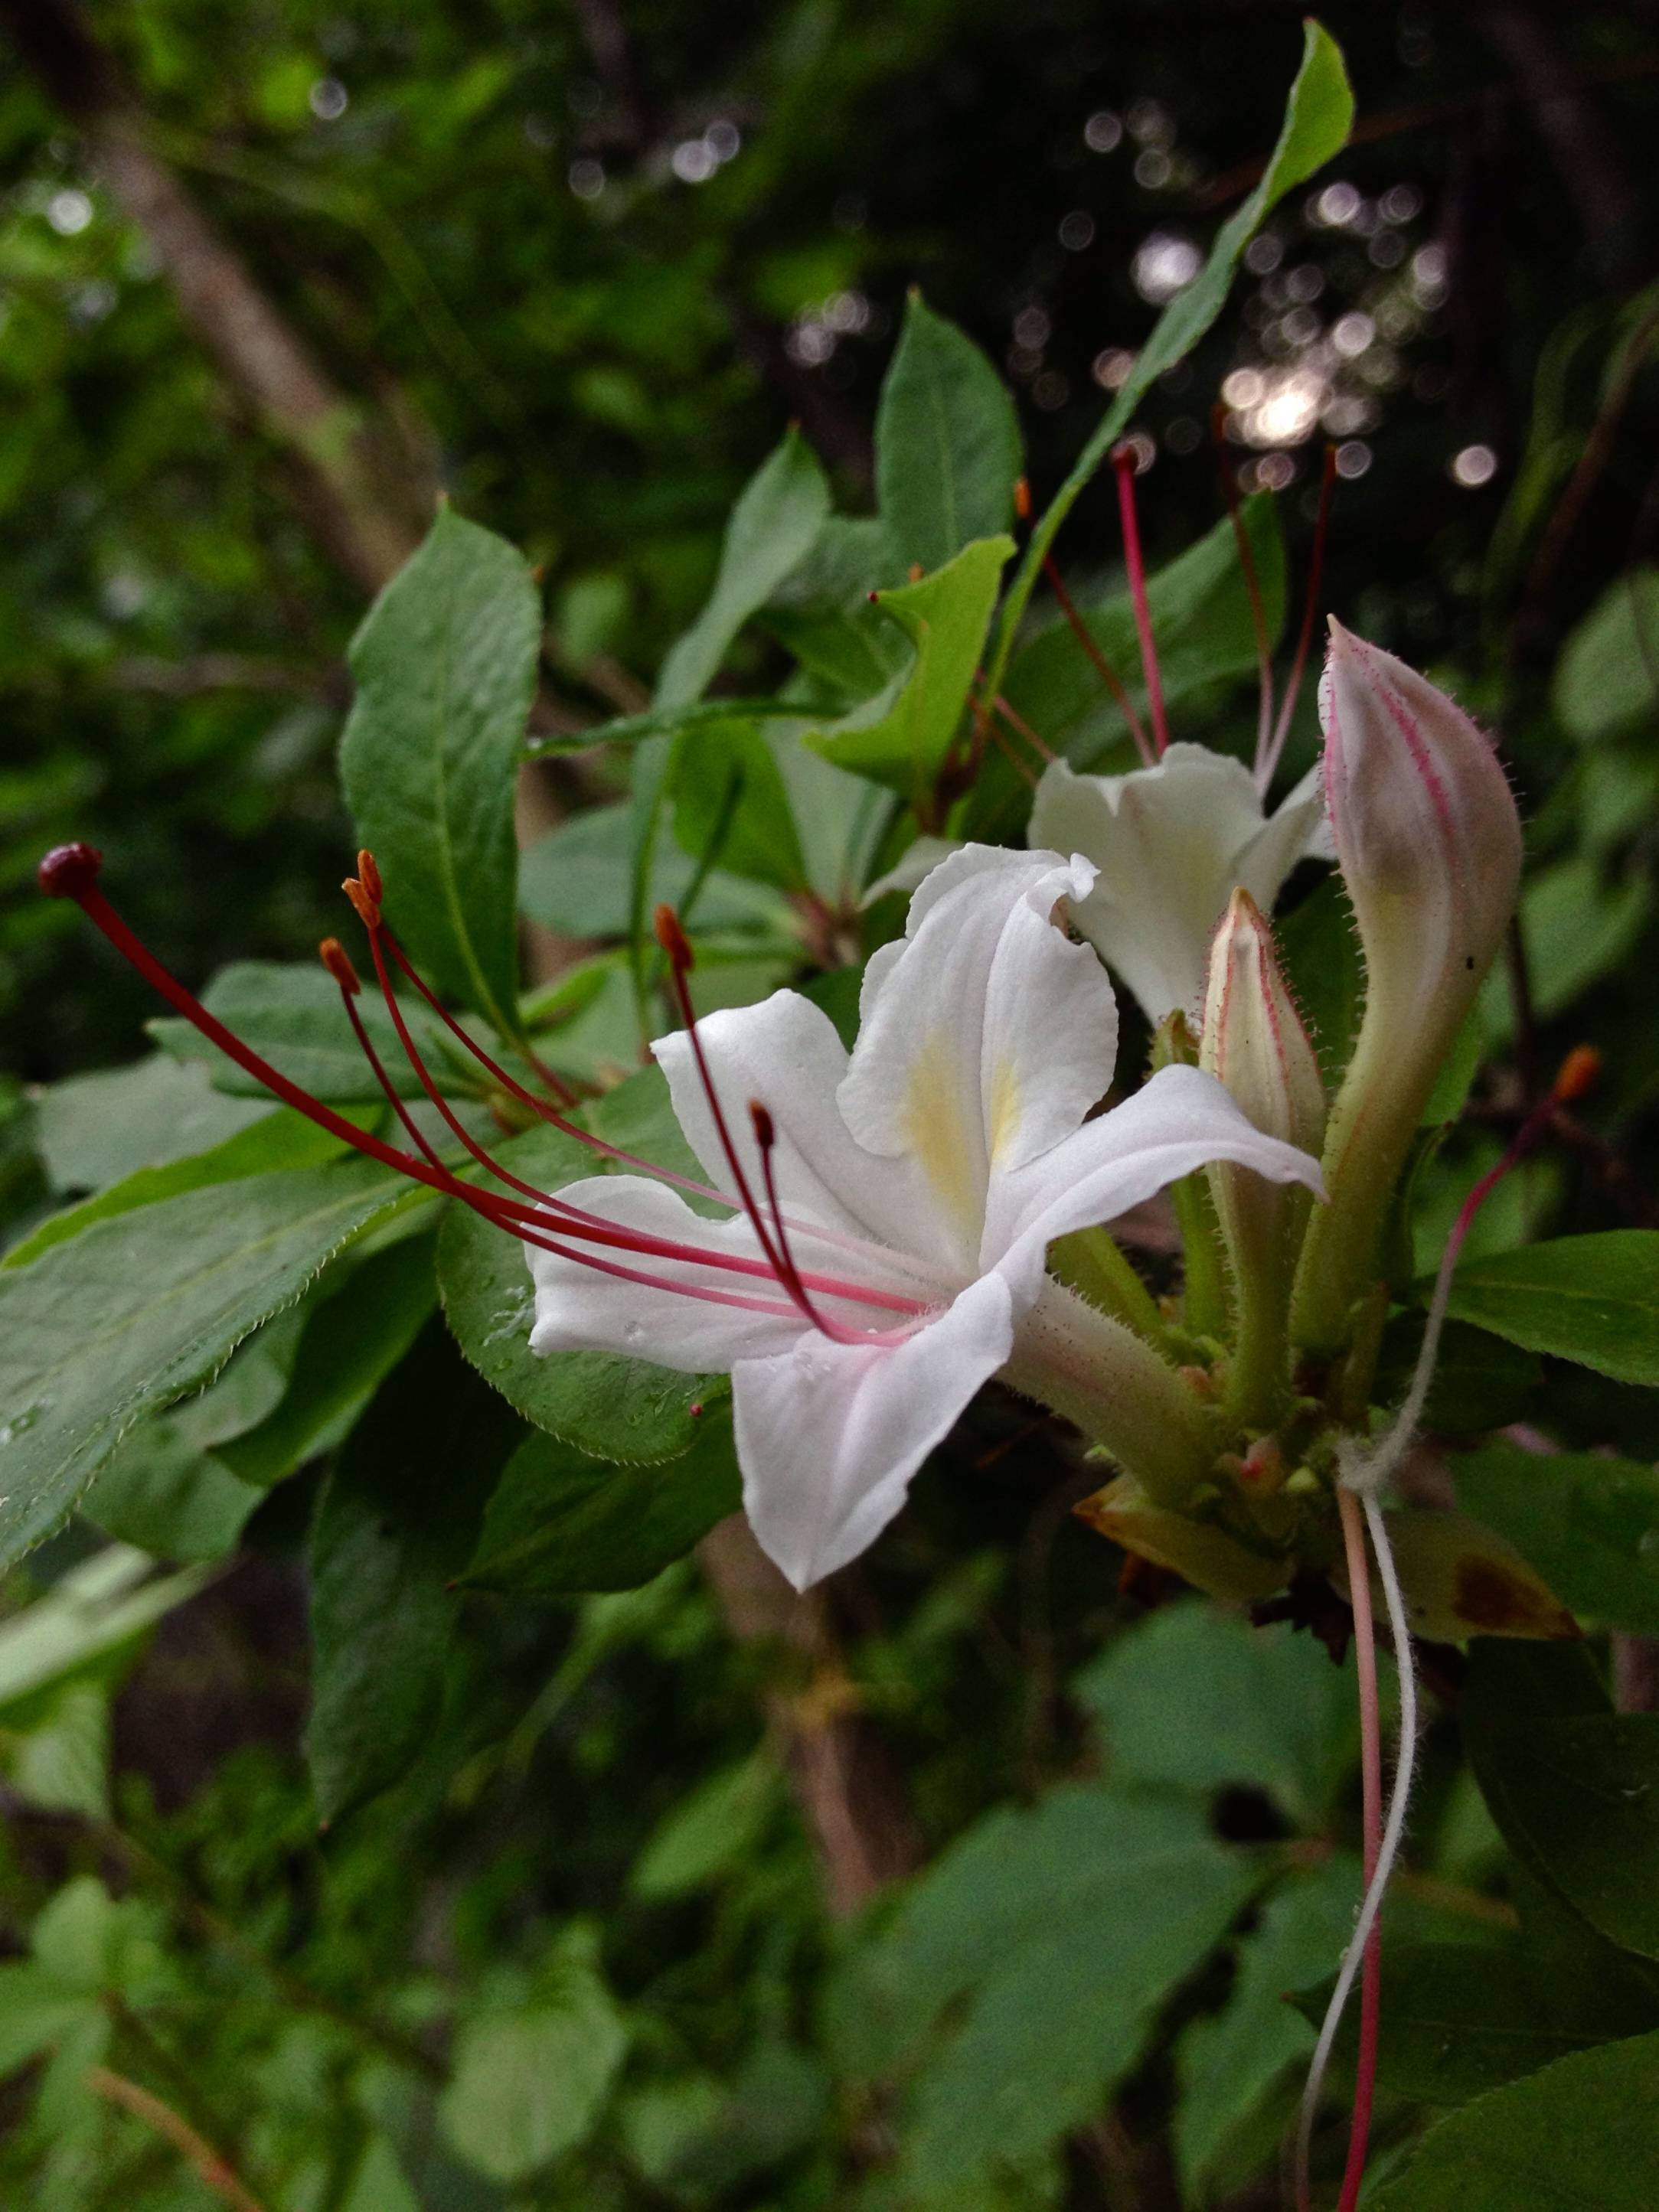 white flowers with red stamens, pink-lime buds and green leaves